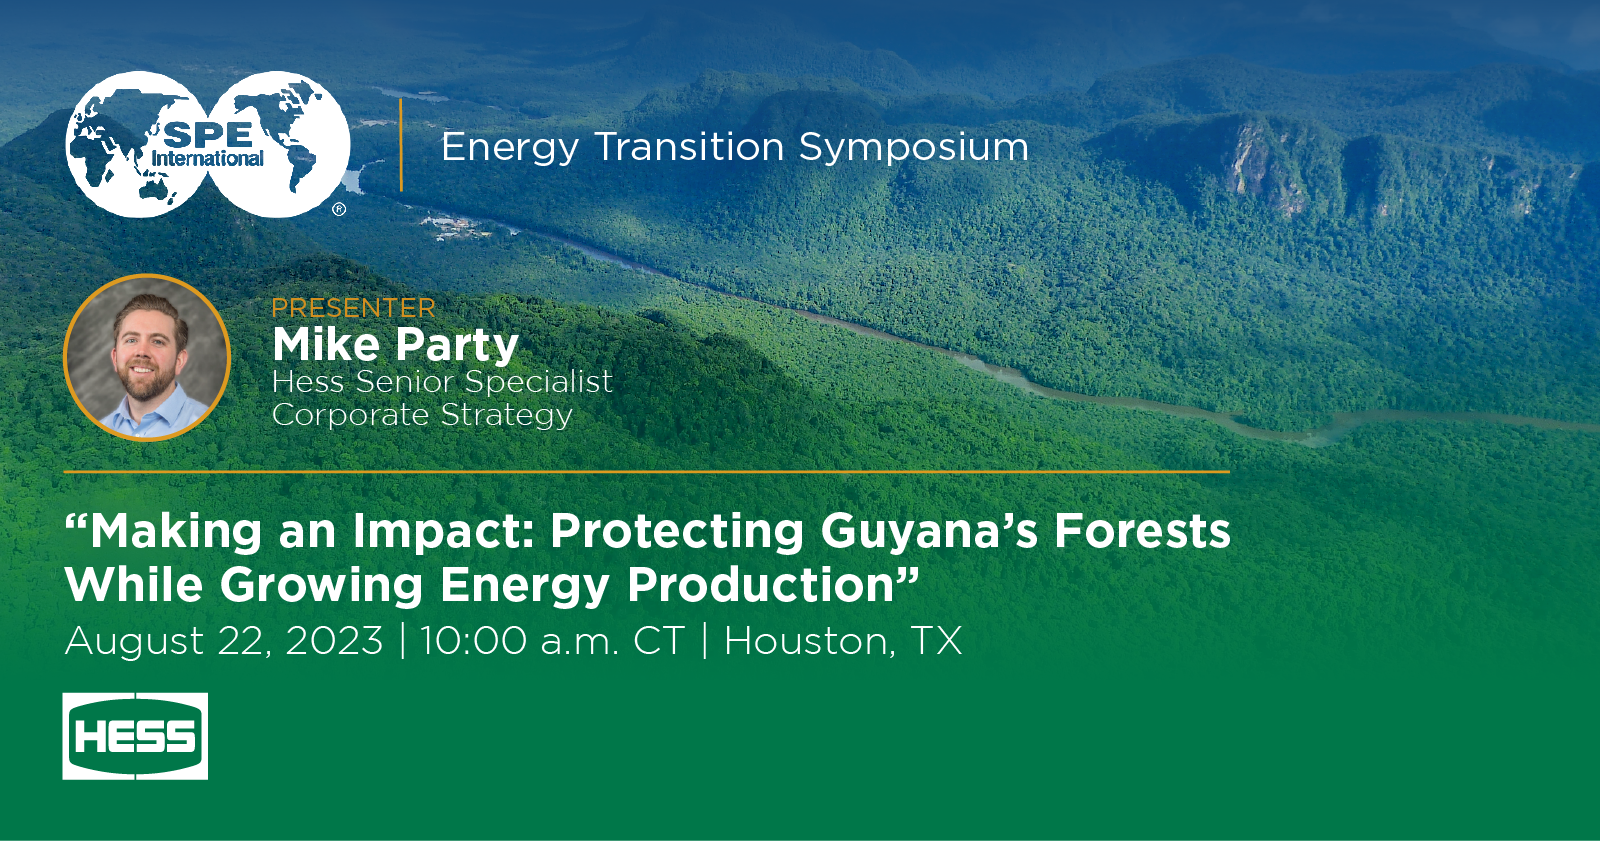 Party to Present at SPE Energy Transition Symposium